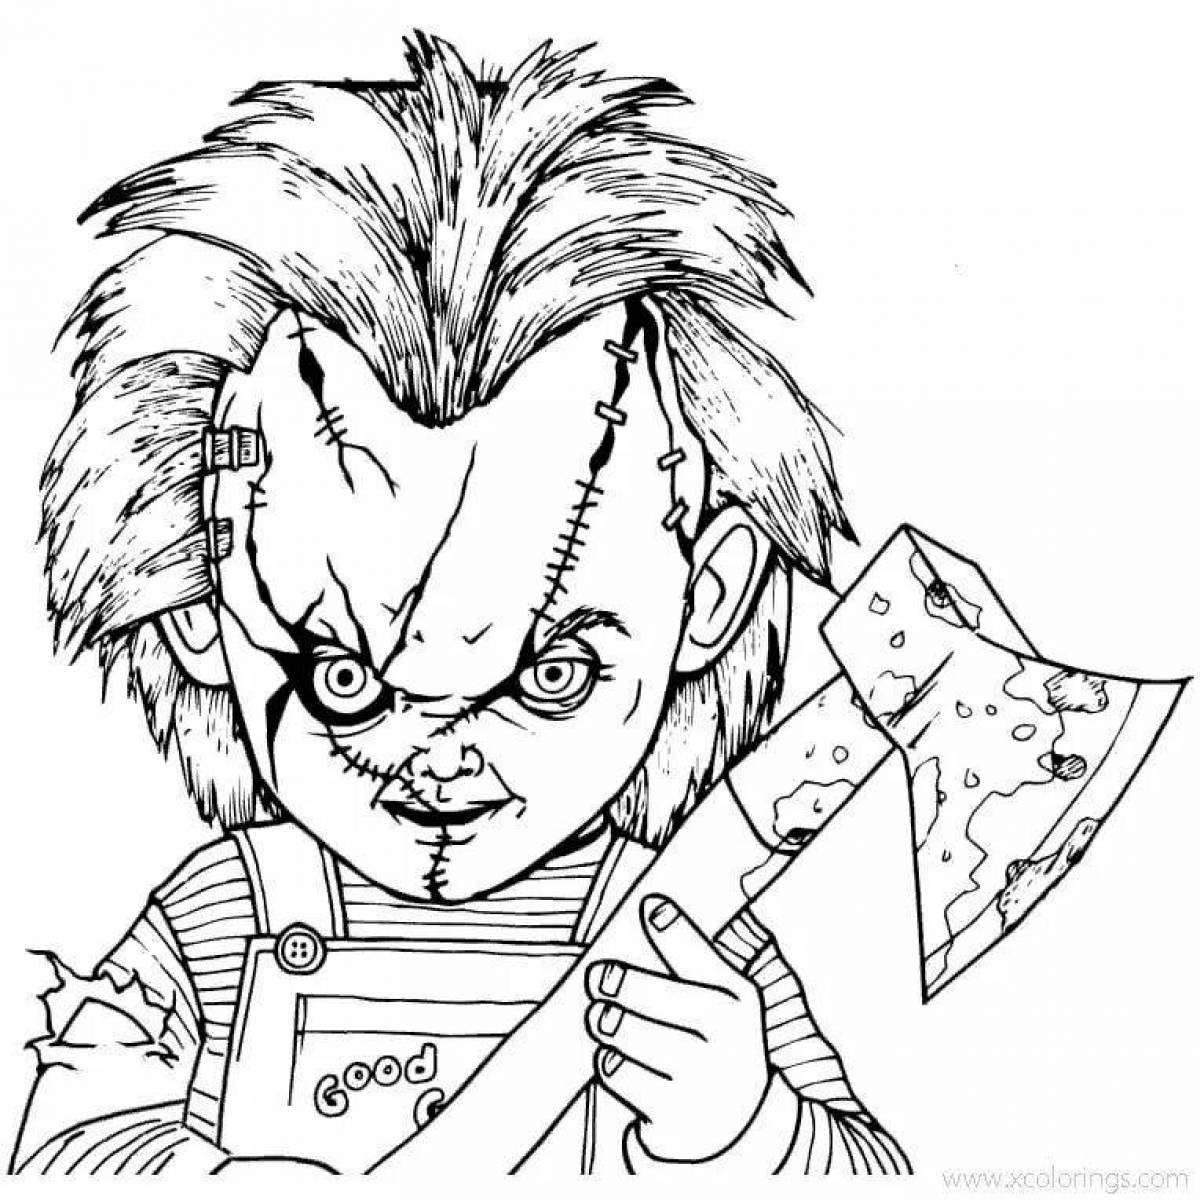 Chucky's coloring page is unnerving